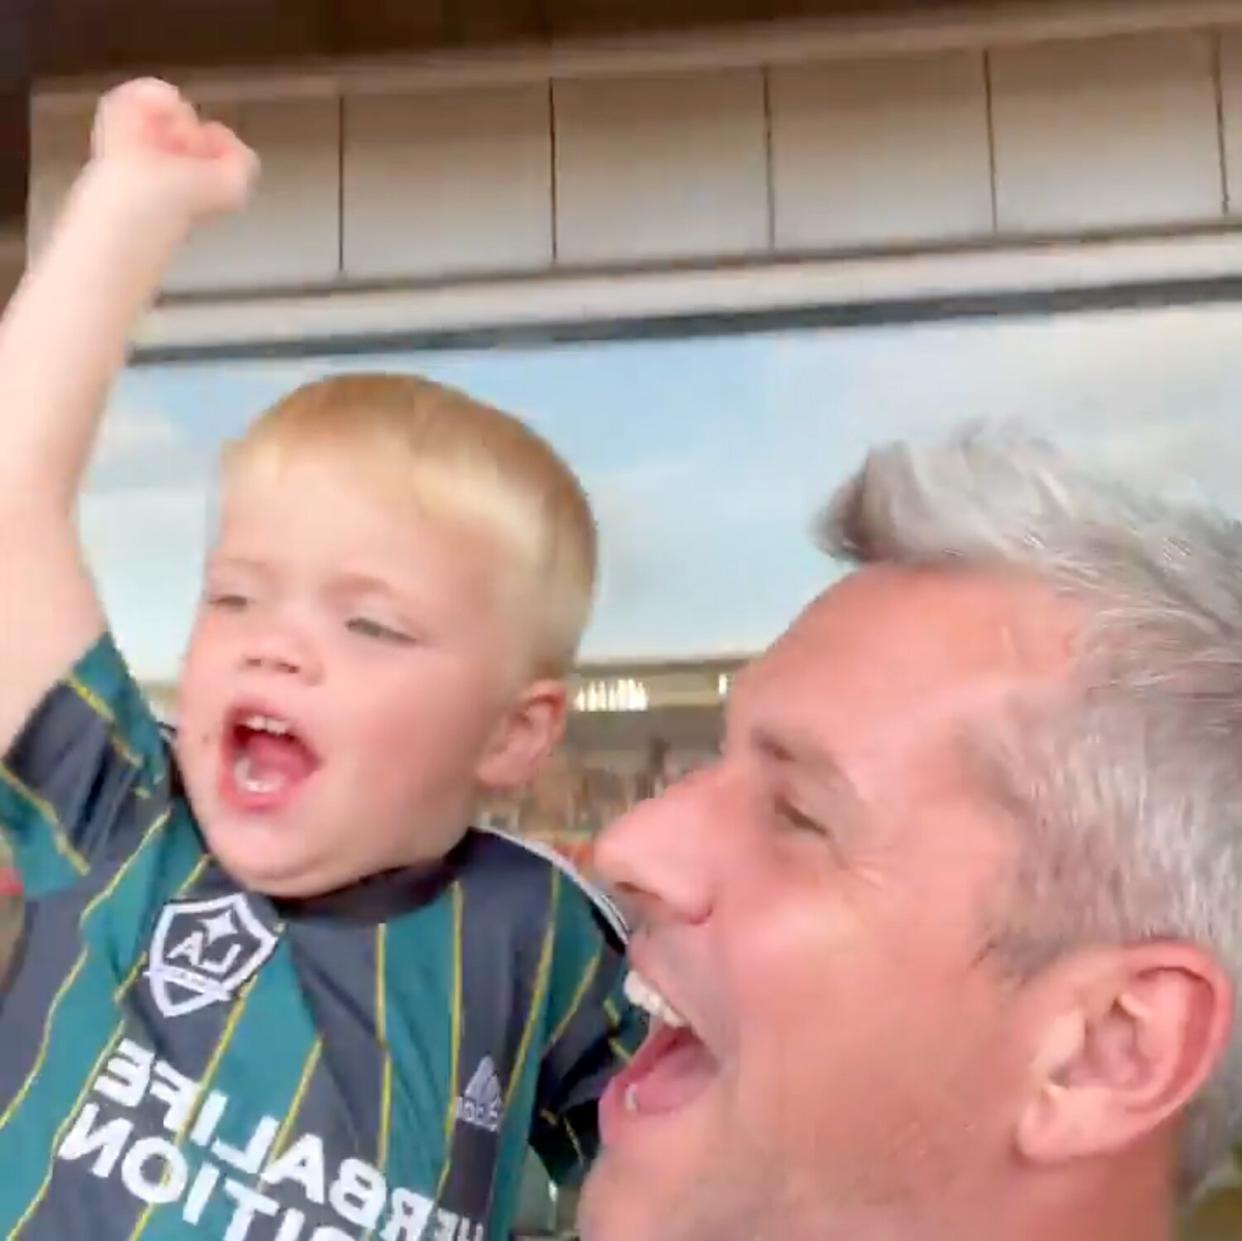 Ant Anstead Has a Blast Cheering With Son Hudson at Soccer Match: 'Now That's a Proper Saturday Night!'